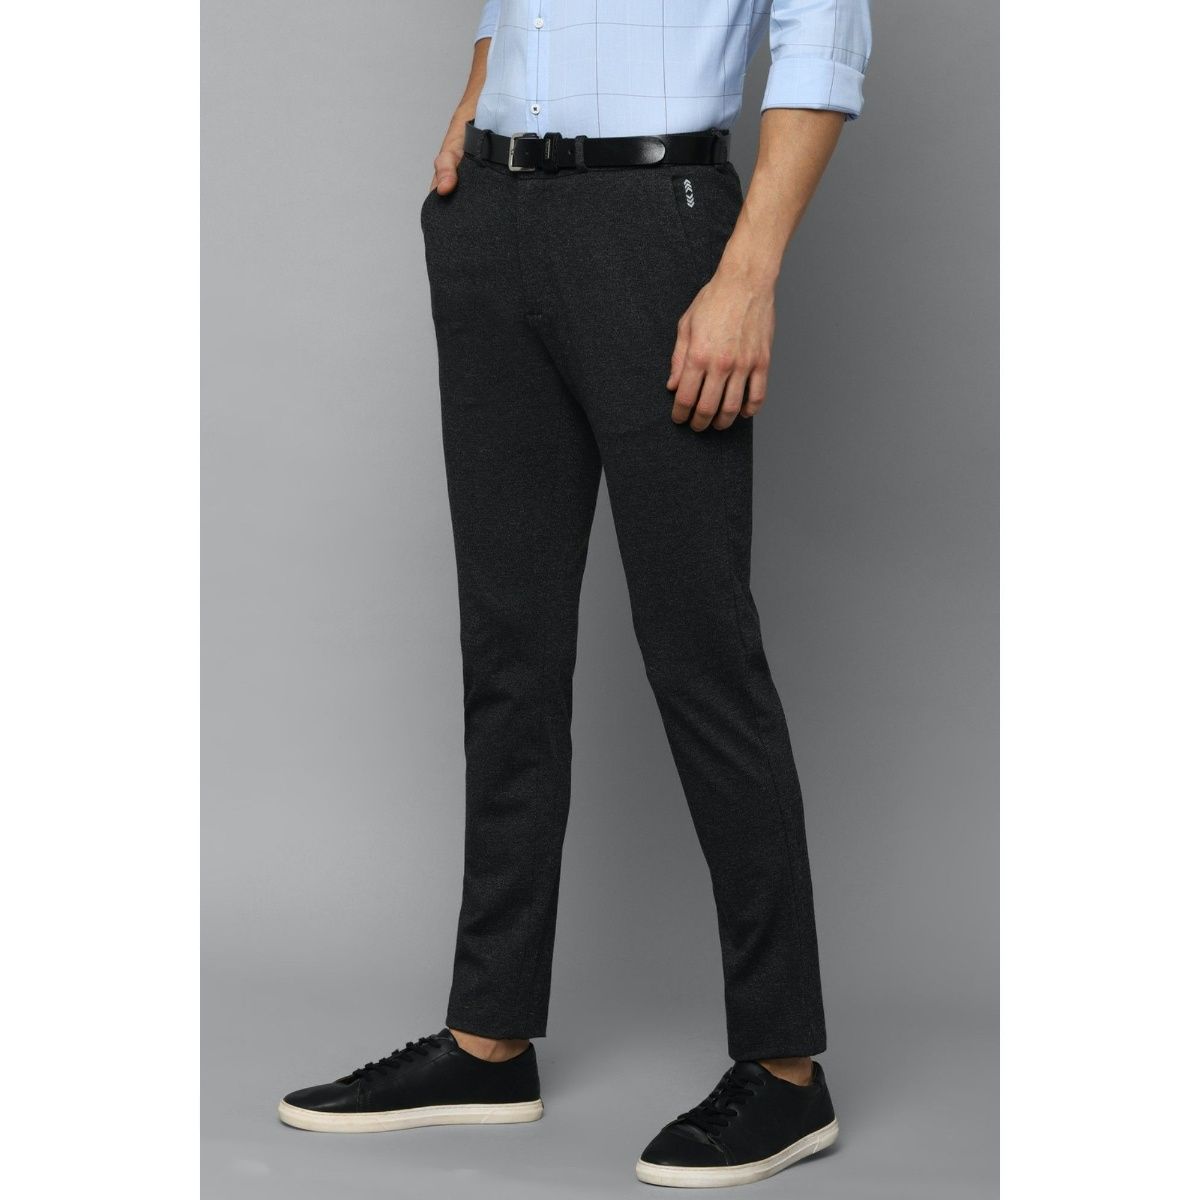 Louis Philippe Athwork Casual Trousers  Buy Louis Philippe Athwork Casual  Trousers online in India